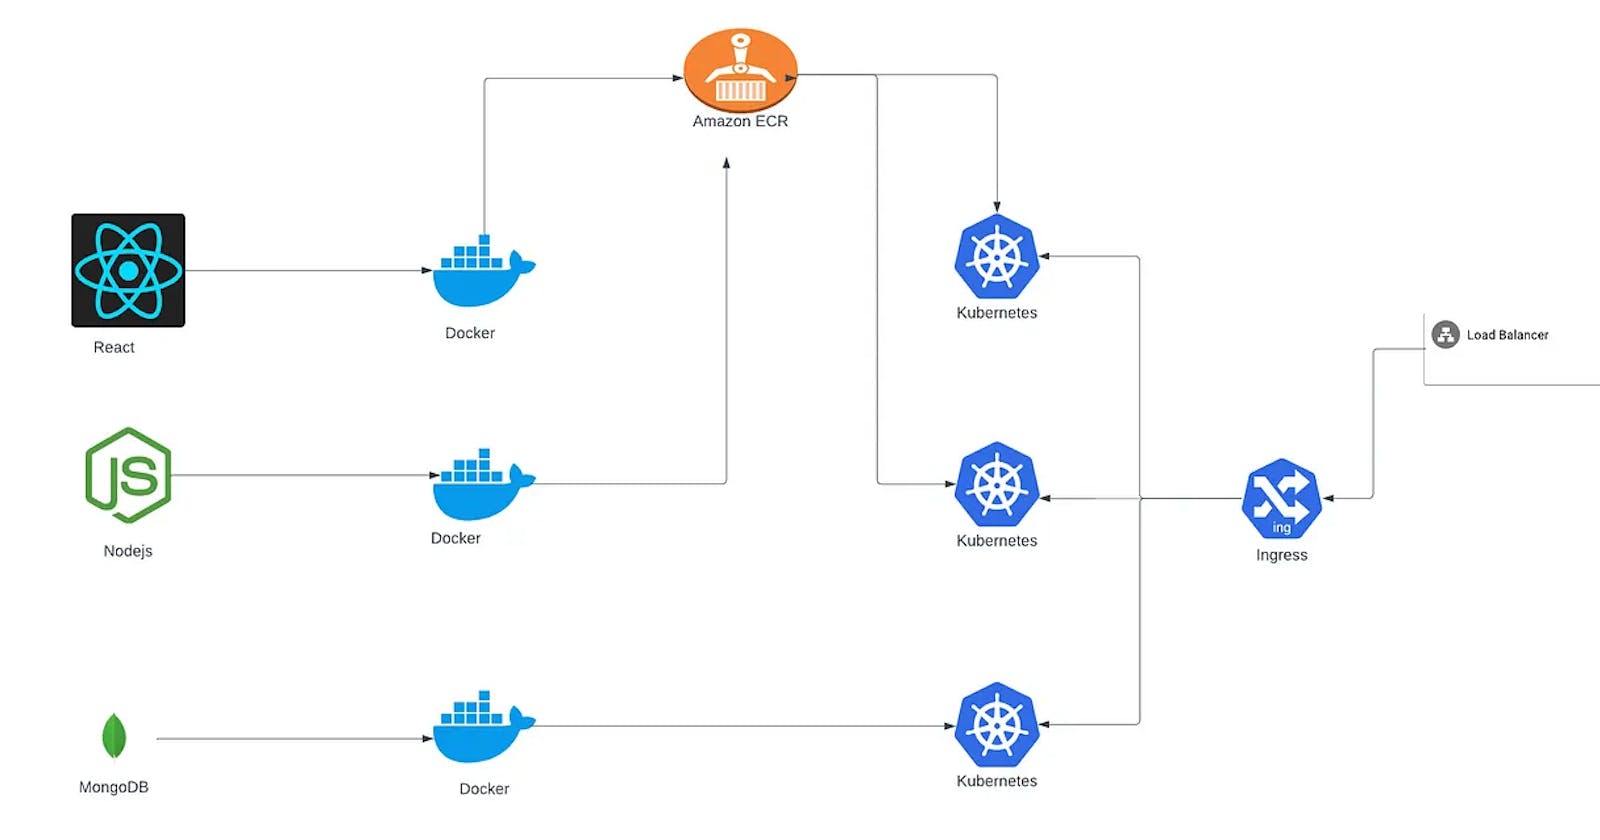 Deploying a Three-Tier Application on AWS with Kubernetes - A Step-by-Step Guide